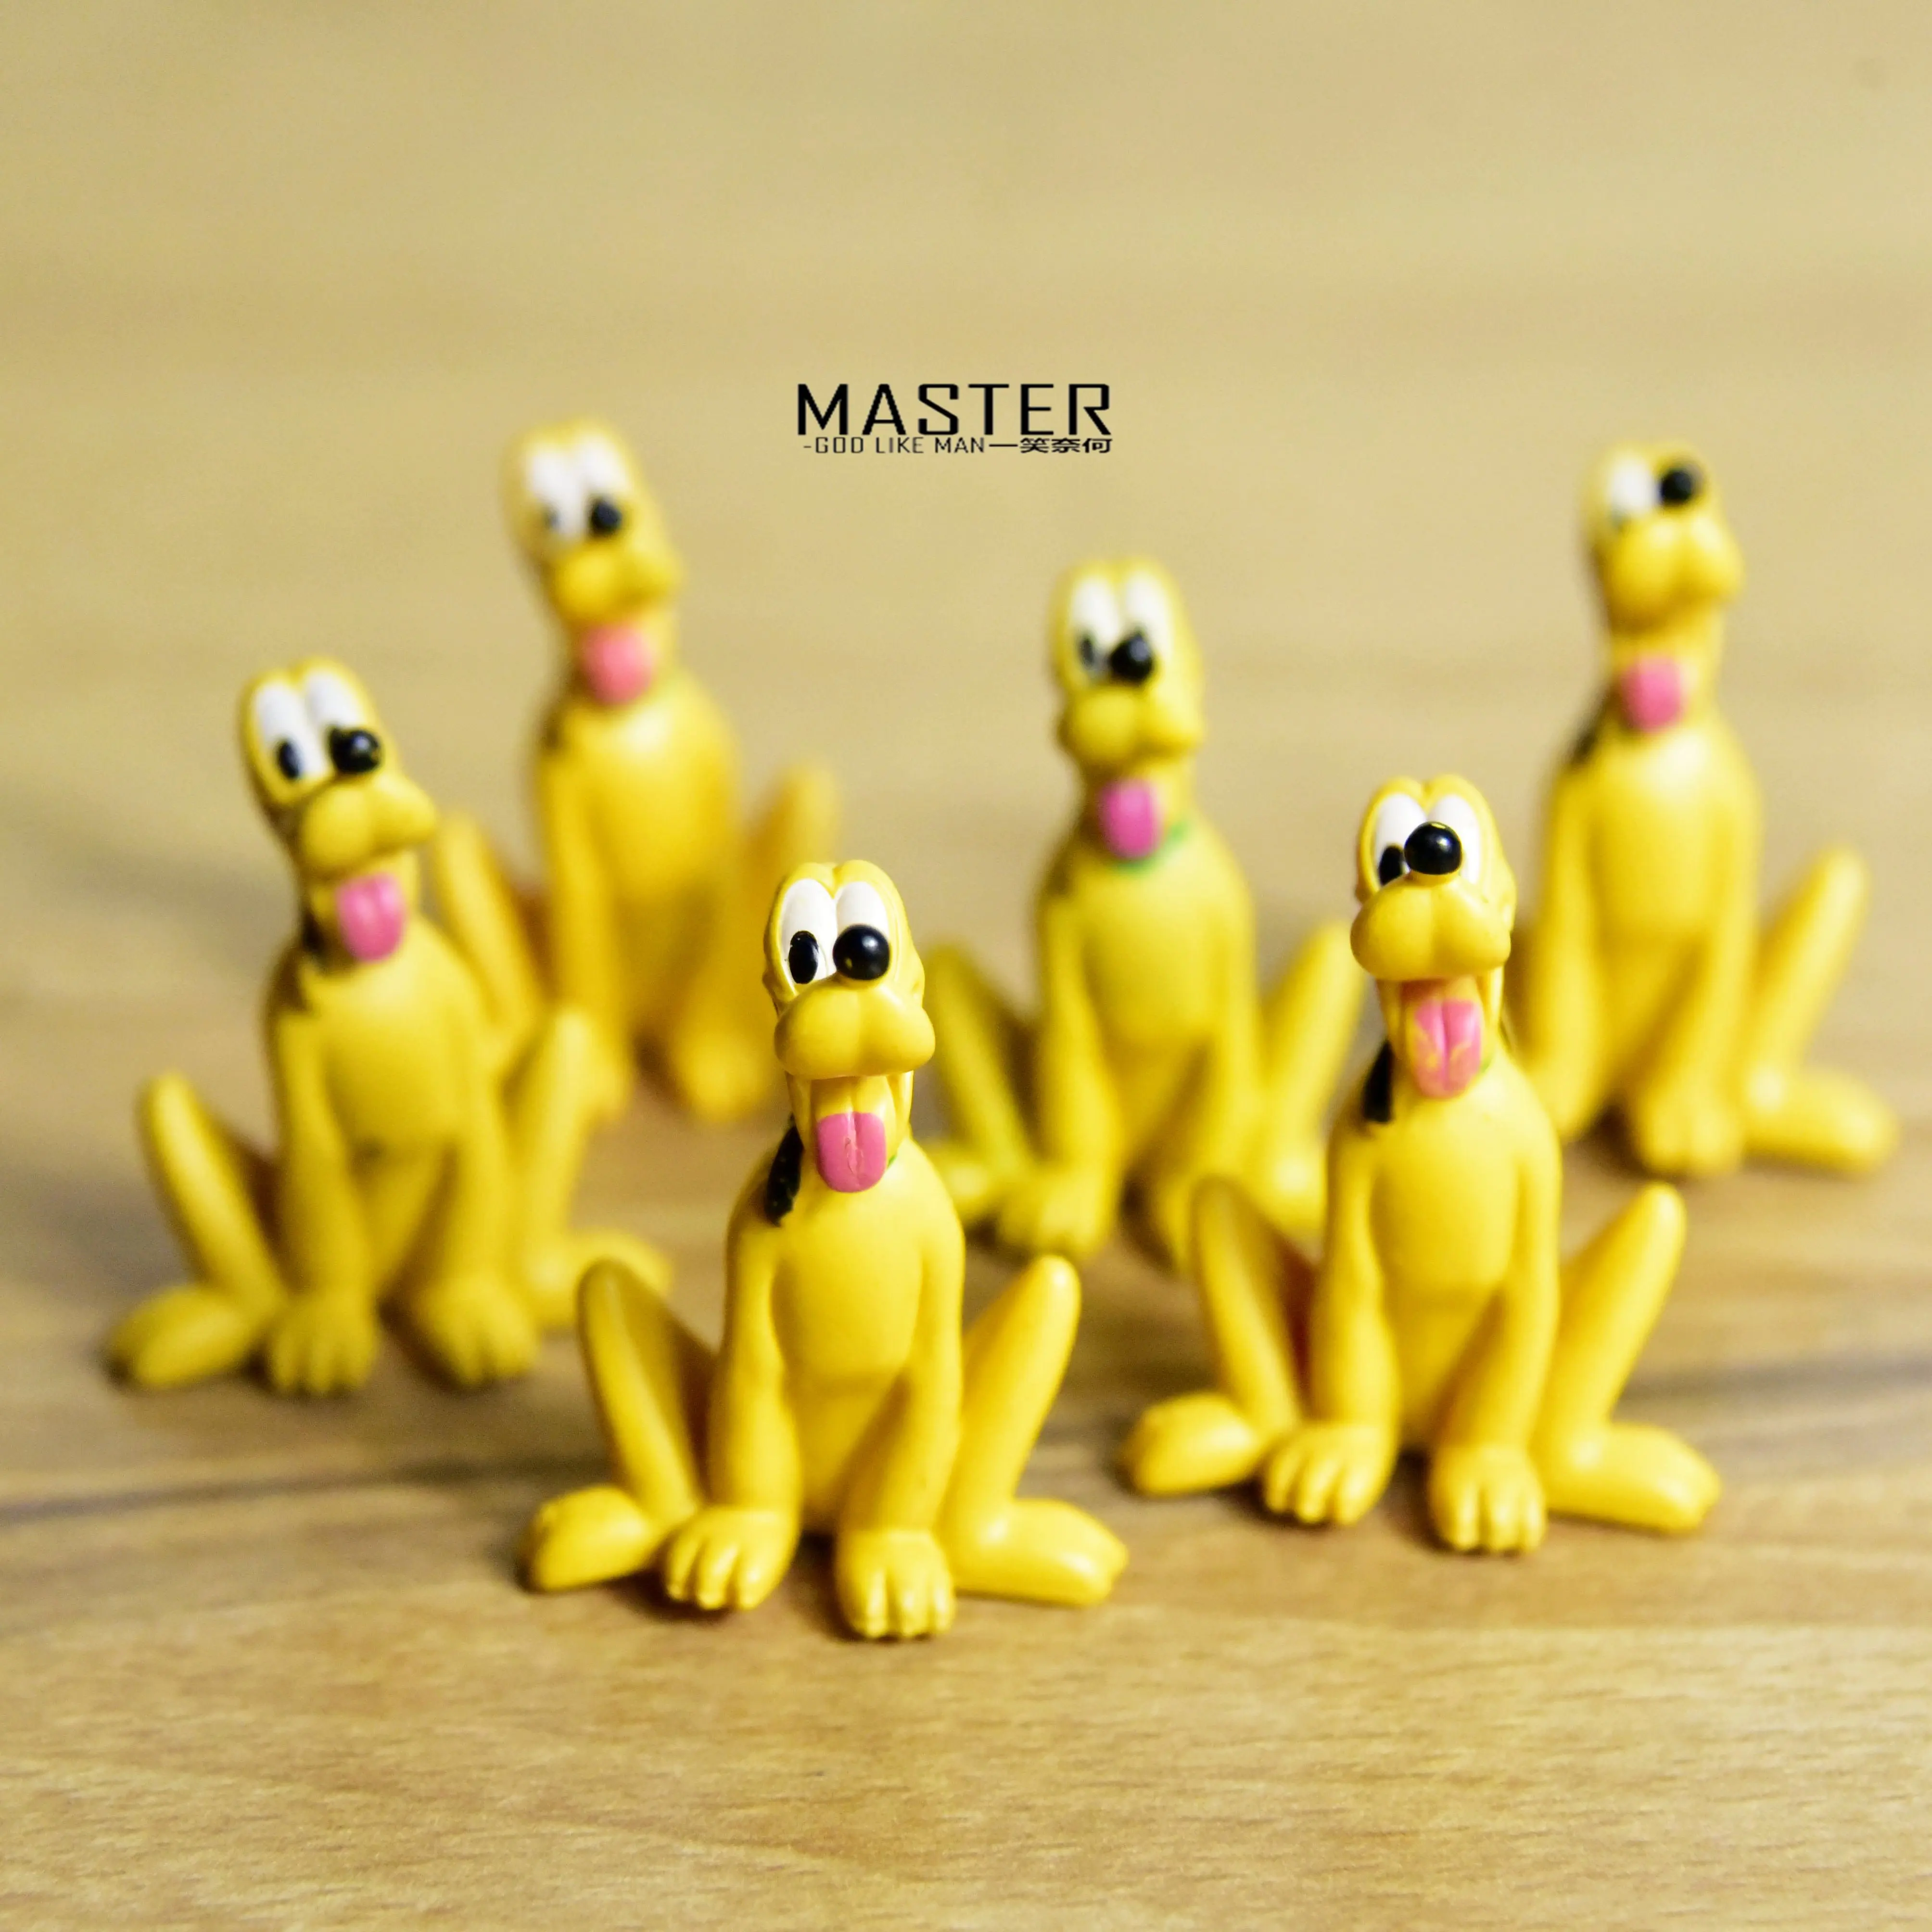 

12pcs/lot 4.5cm Disney Mickey Mouse Friend Pluto Dog Figure Toy Model Doll Figurine Collection Room Cake Diy Decoration